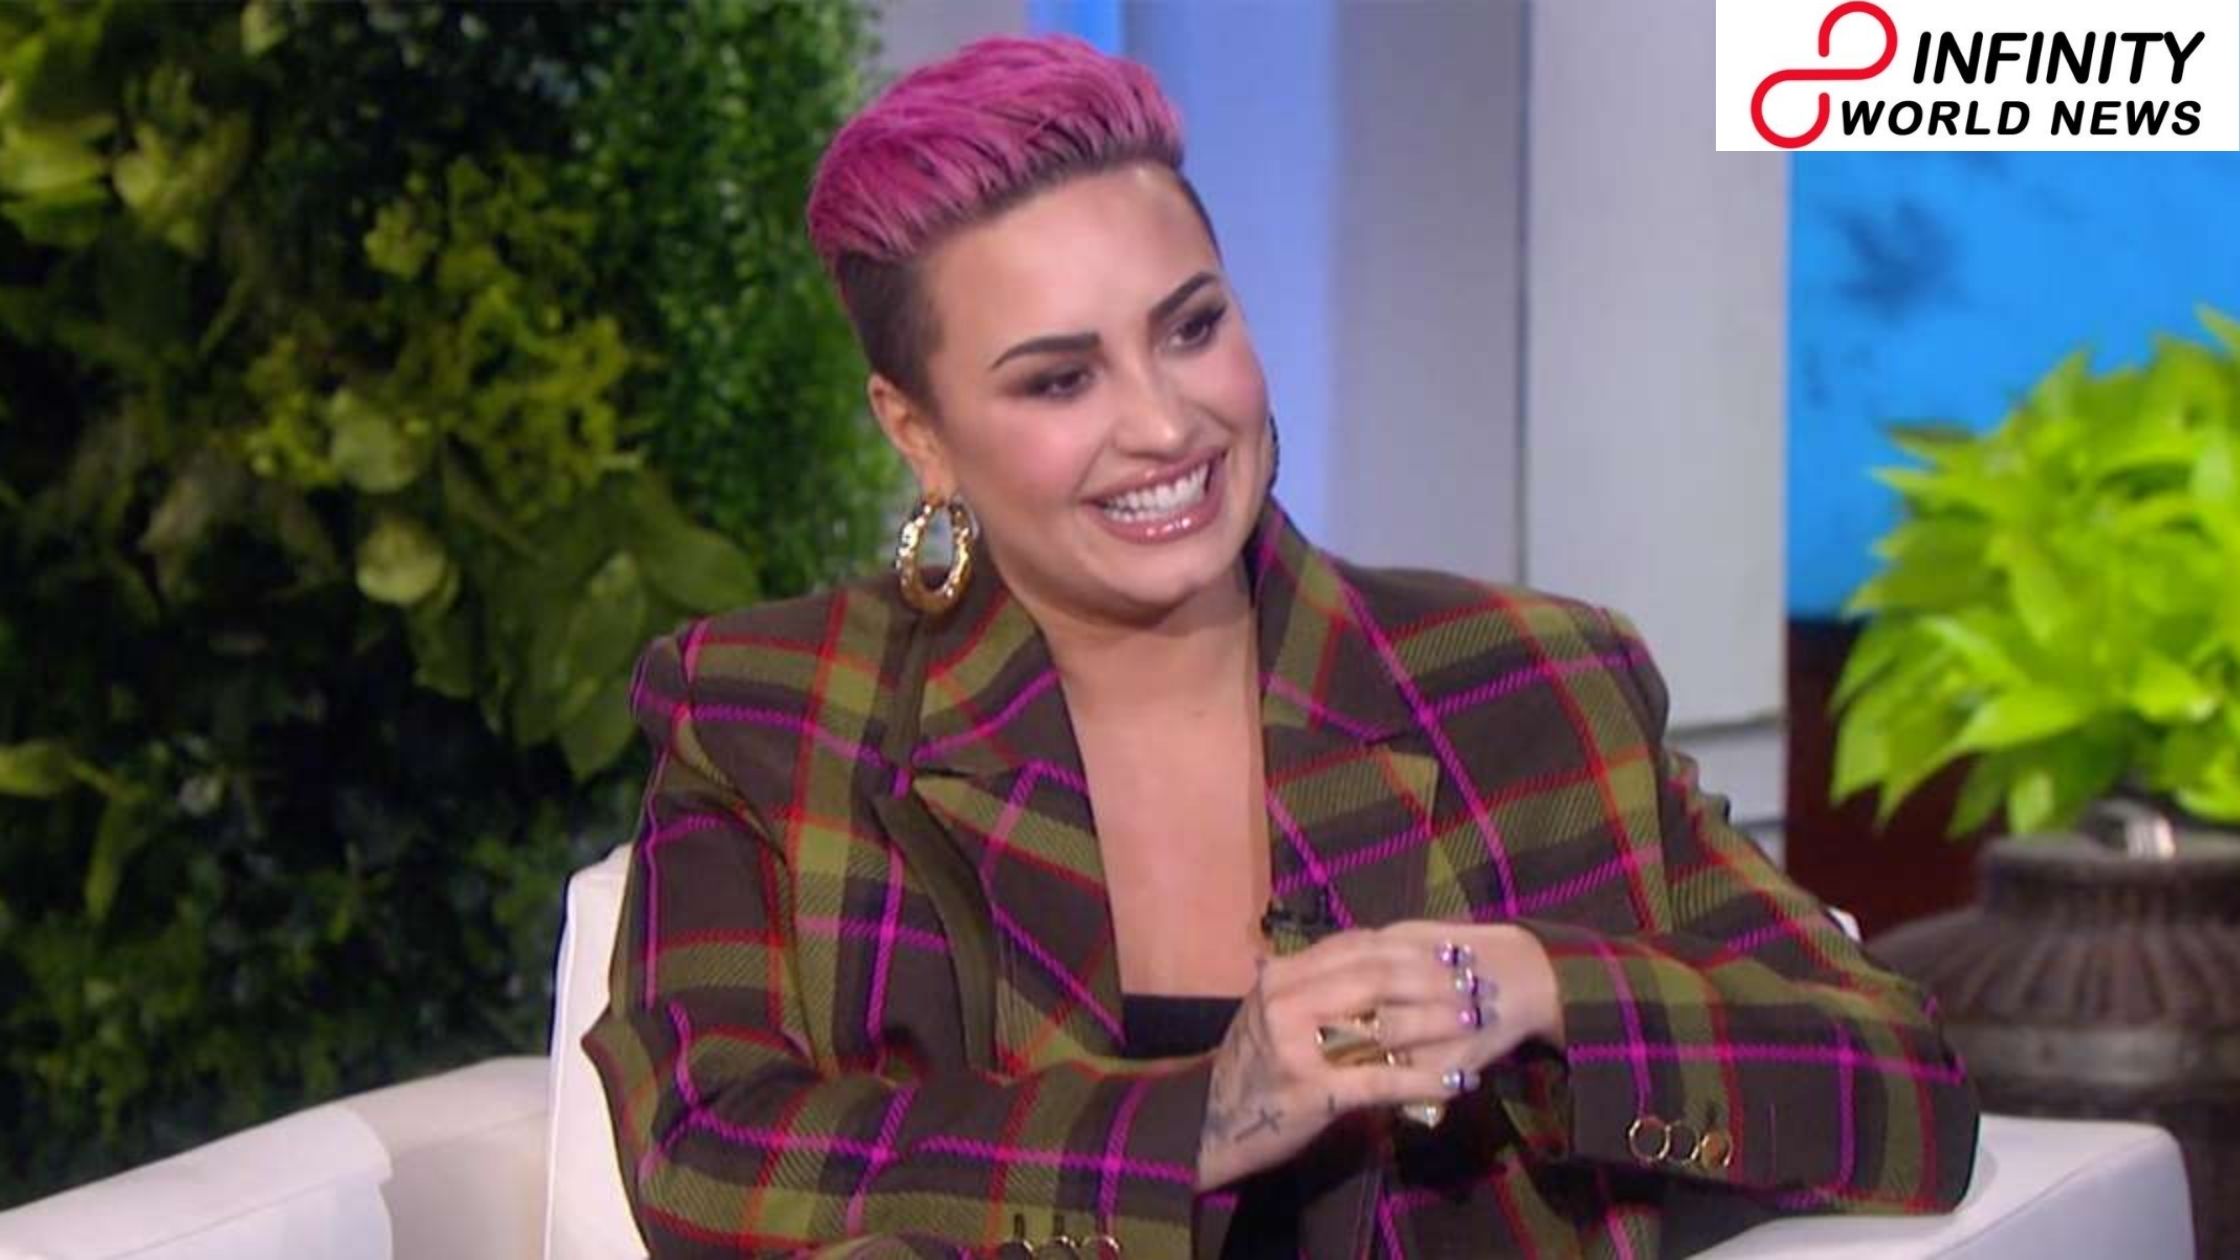 'Feel more bona fide to who I am': Demi Lovato in the wake of trimming her hair